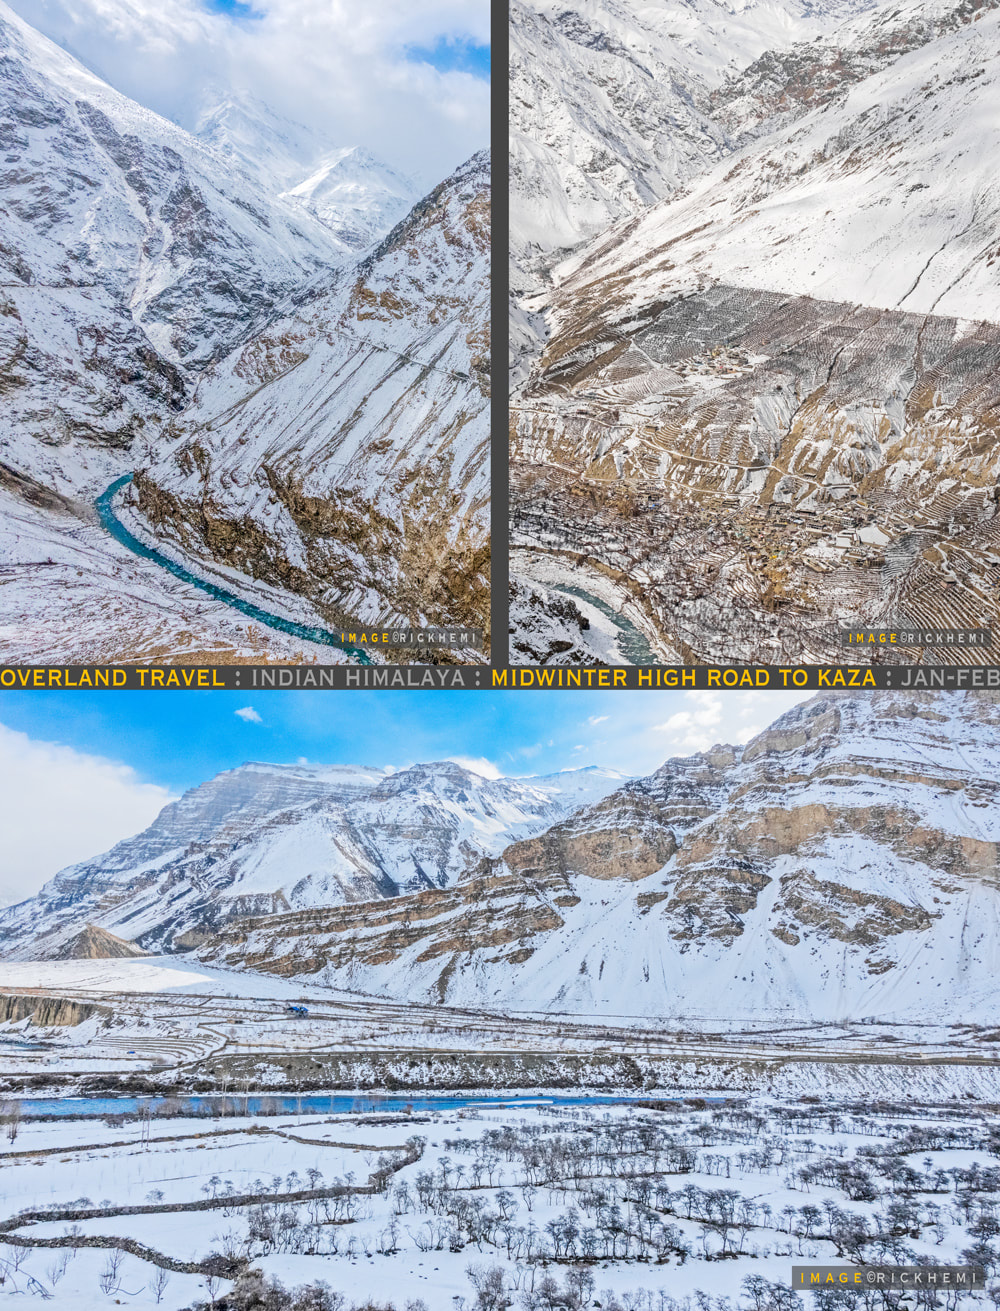 solo overland travel midwinter highlands India, high road midwinter to Spiti Valley, image by Rick Hemi